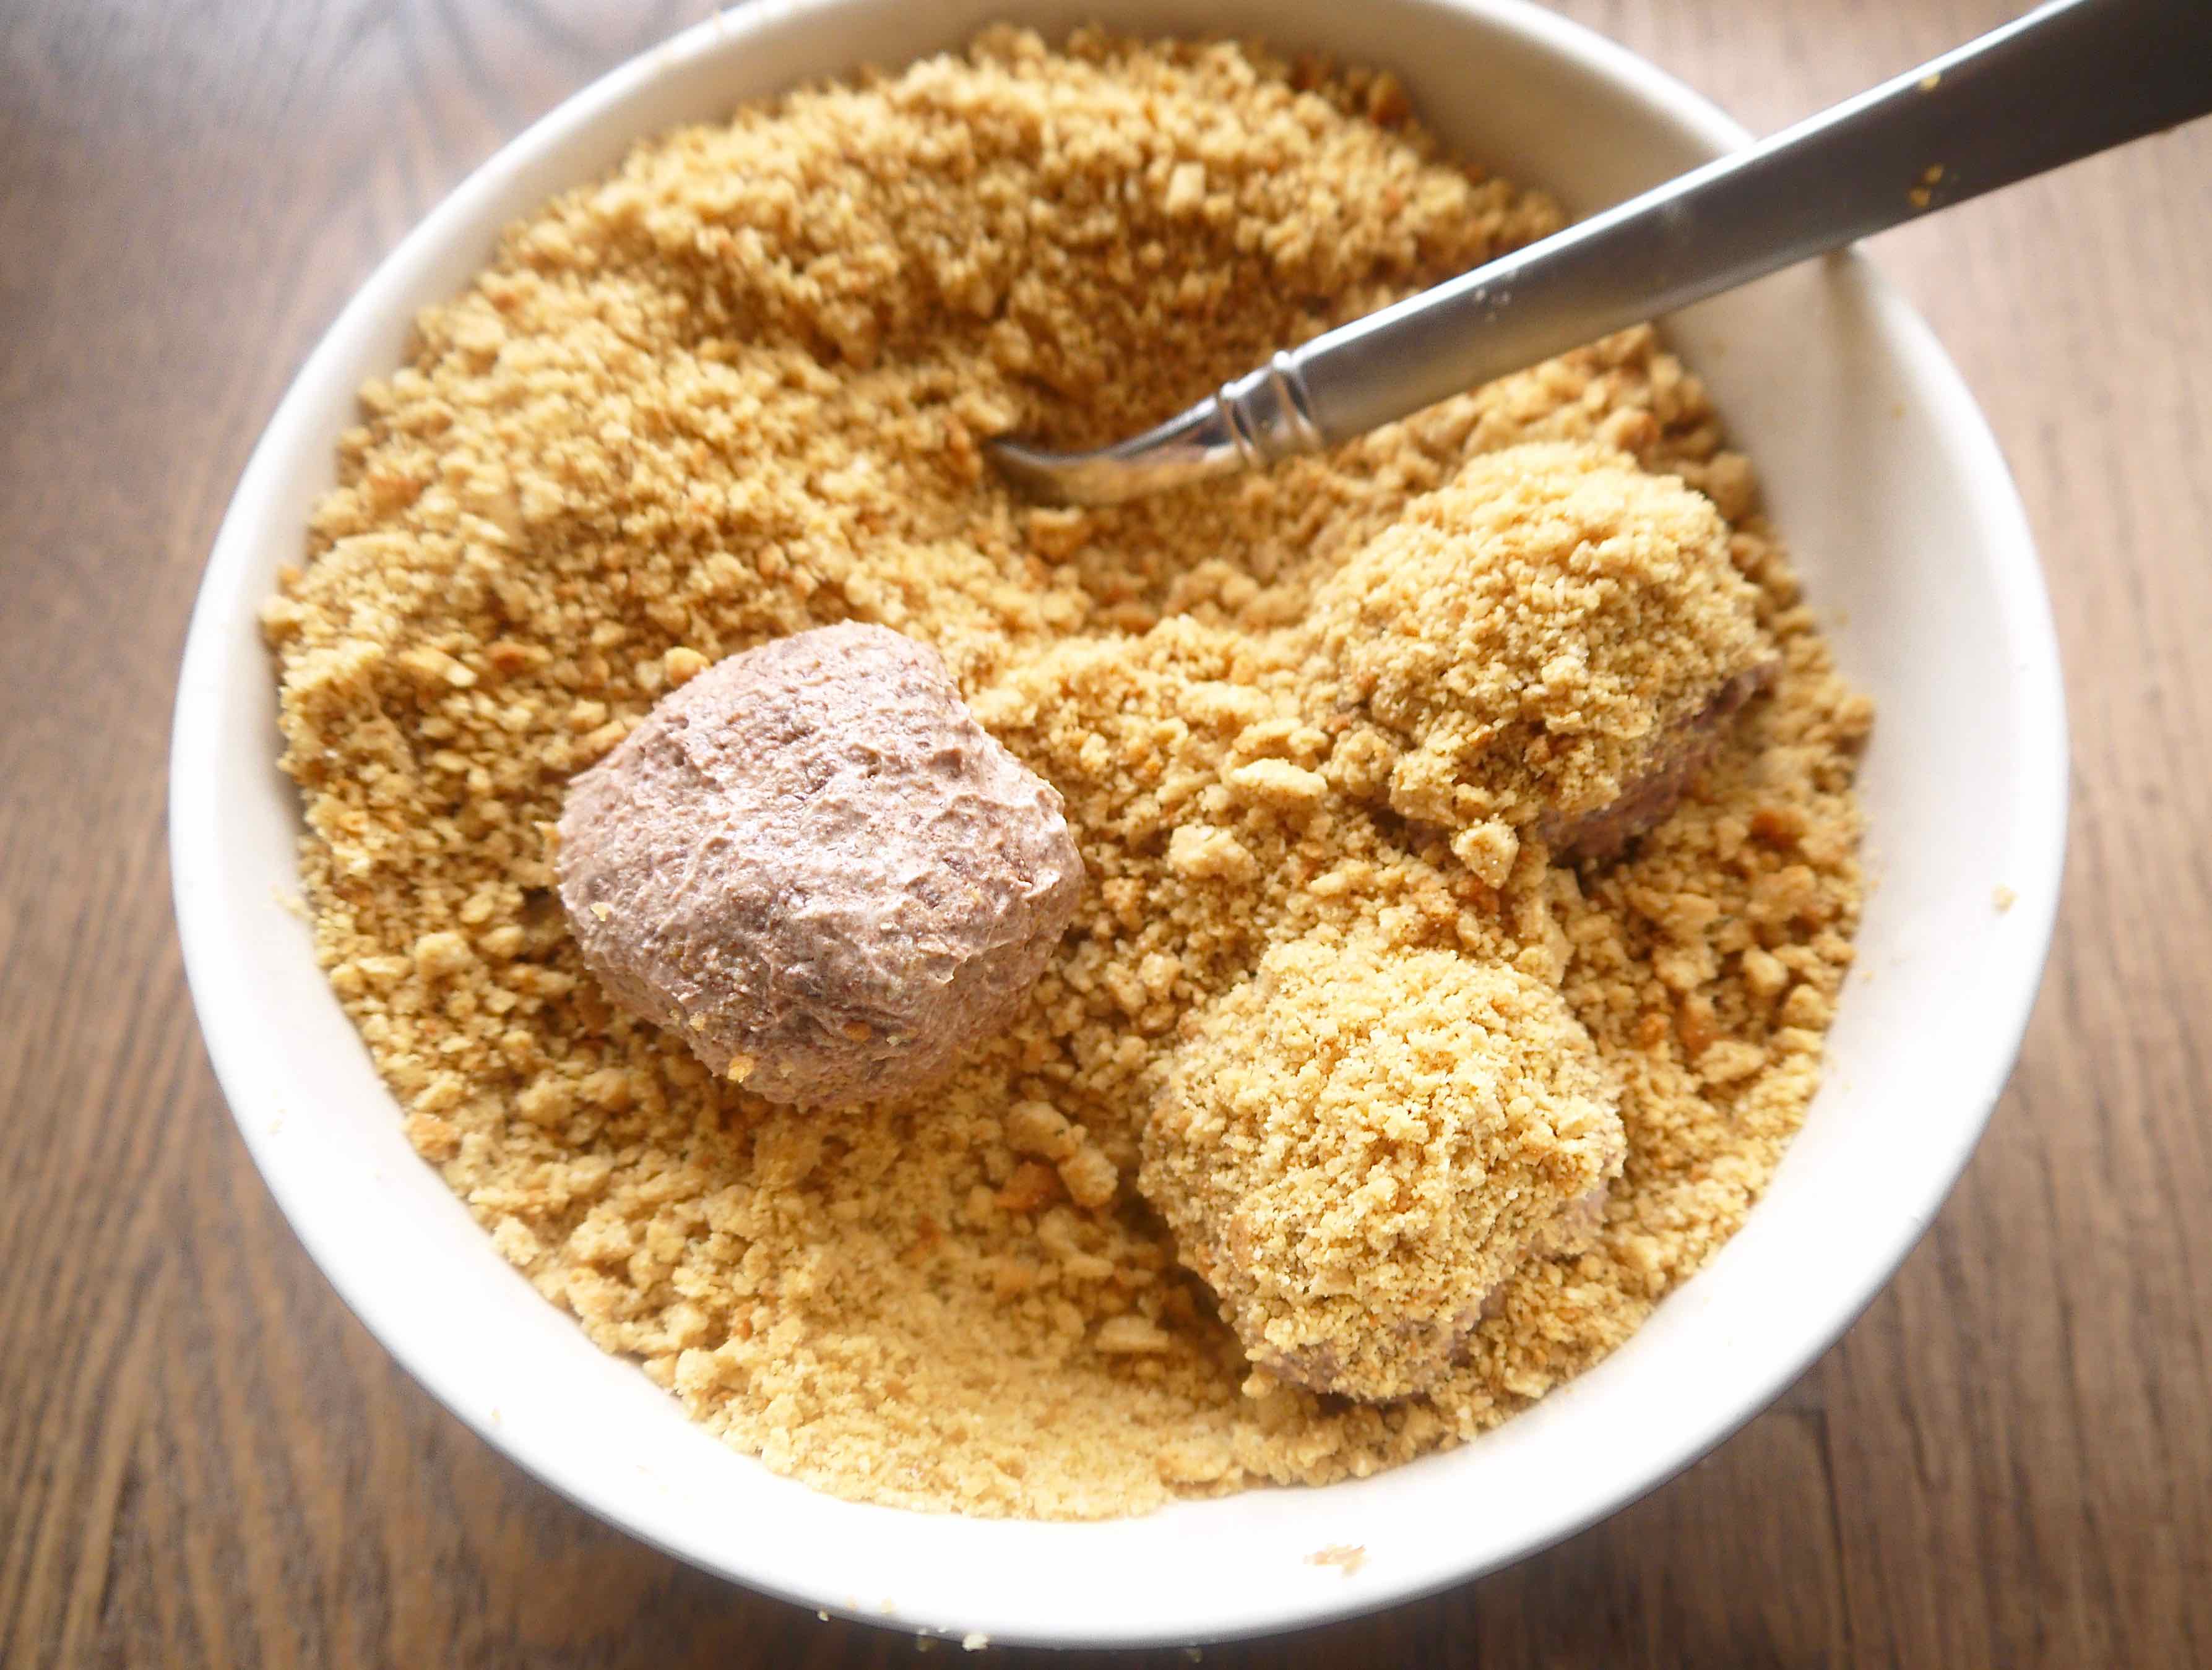 Paleo mousse rolled into a ball and put into cookie crumbs, rolled again and covered in crumbs again.